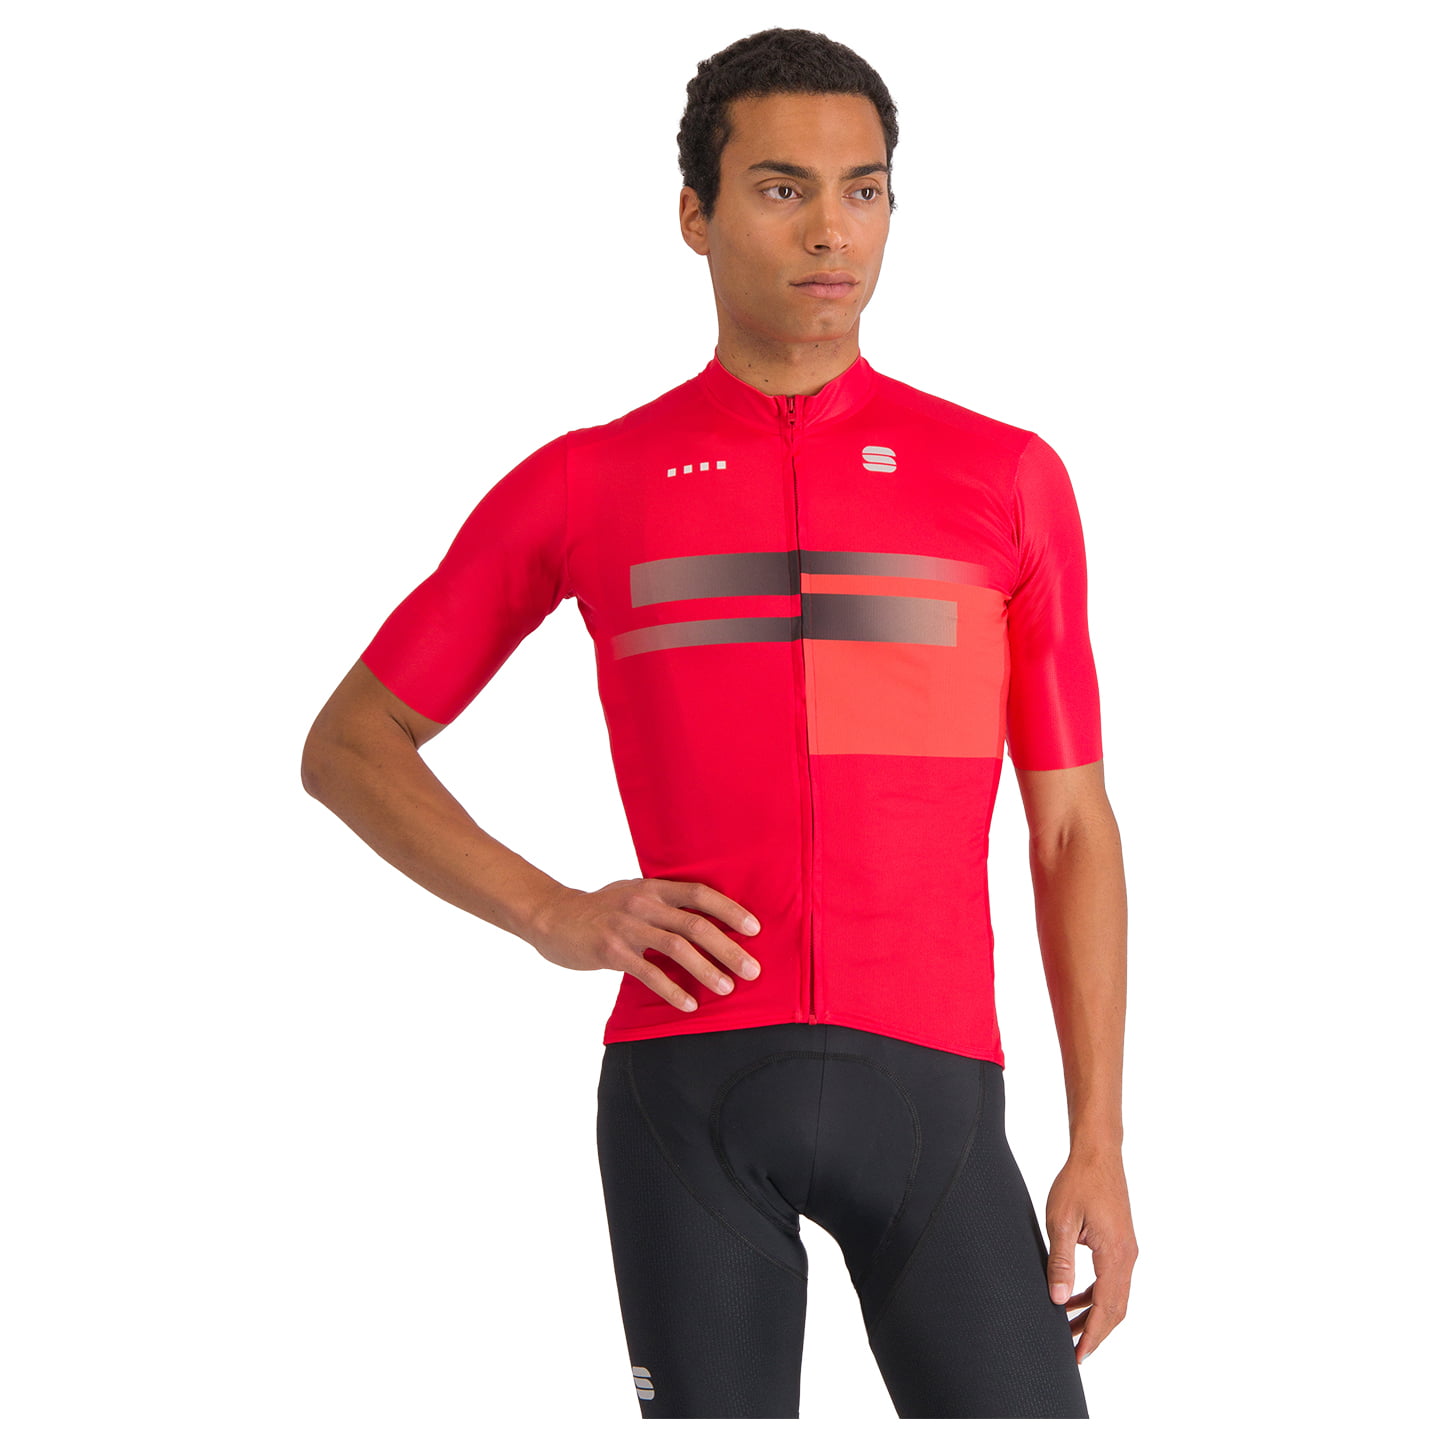 SPORTFUL Gruppetto Short Sleeve Jersey, for men, size M, Cycling jersey, Cycling clothing